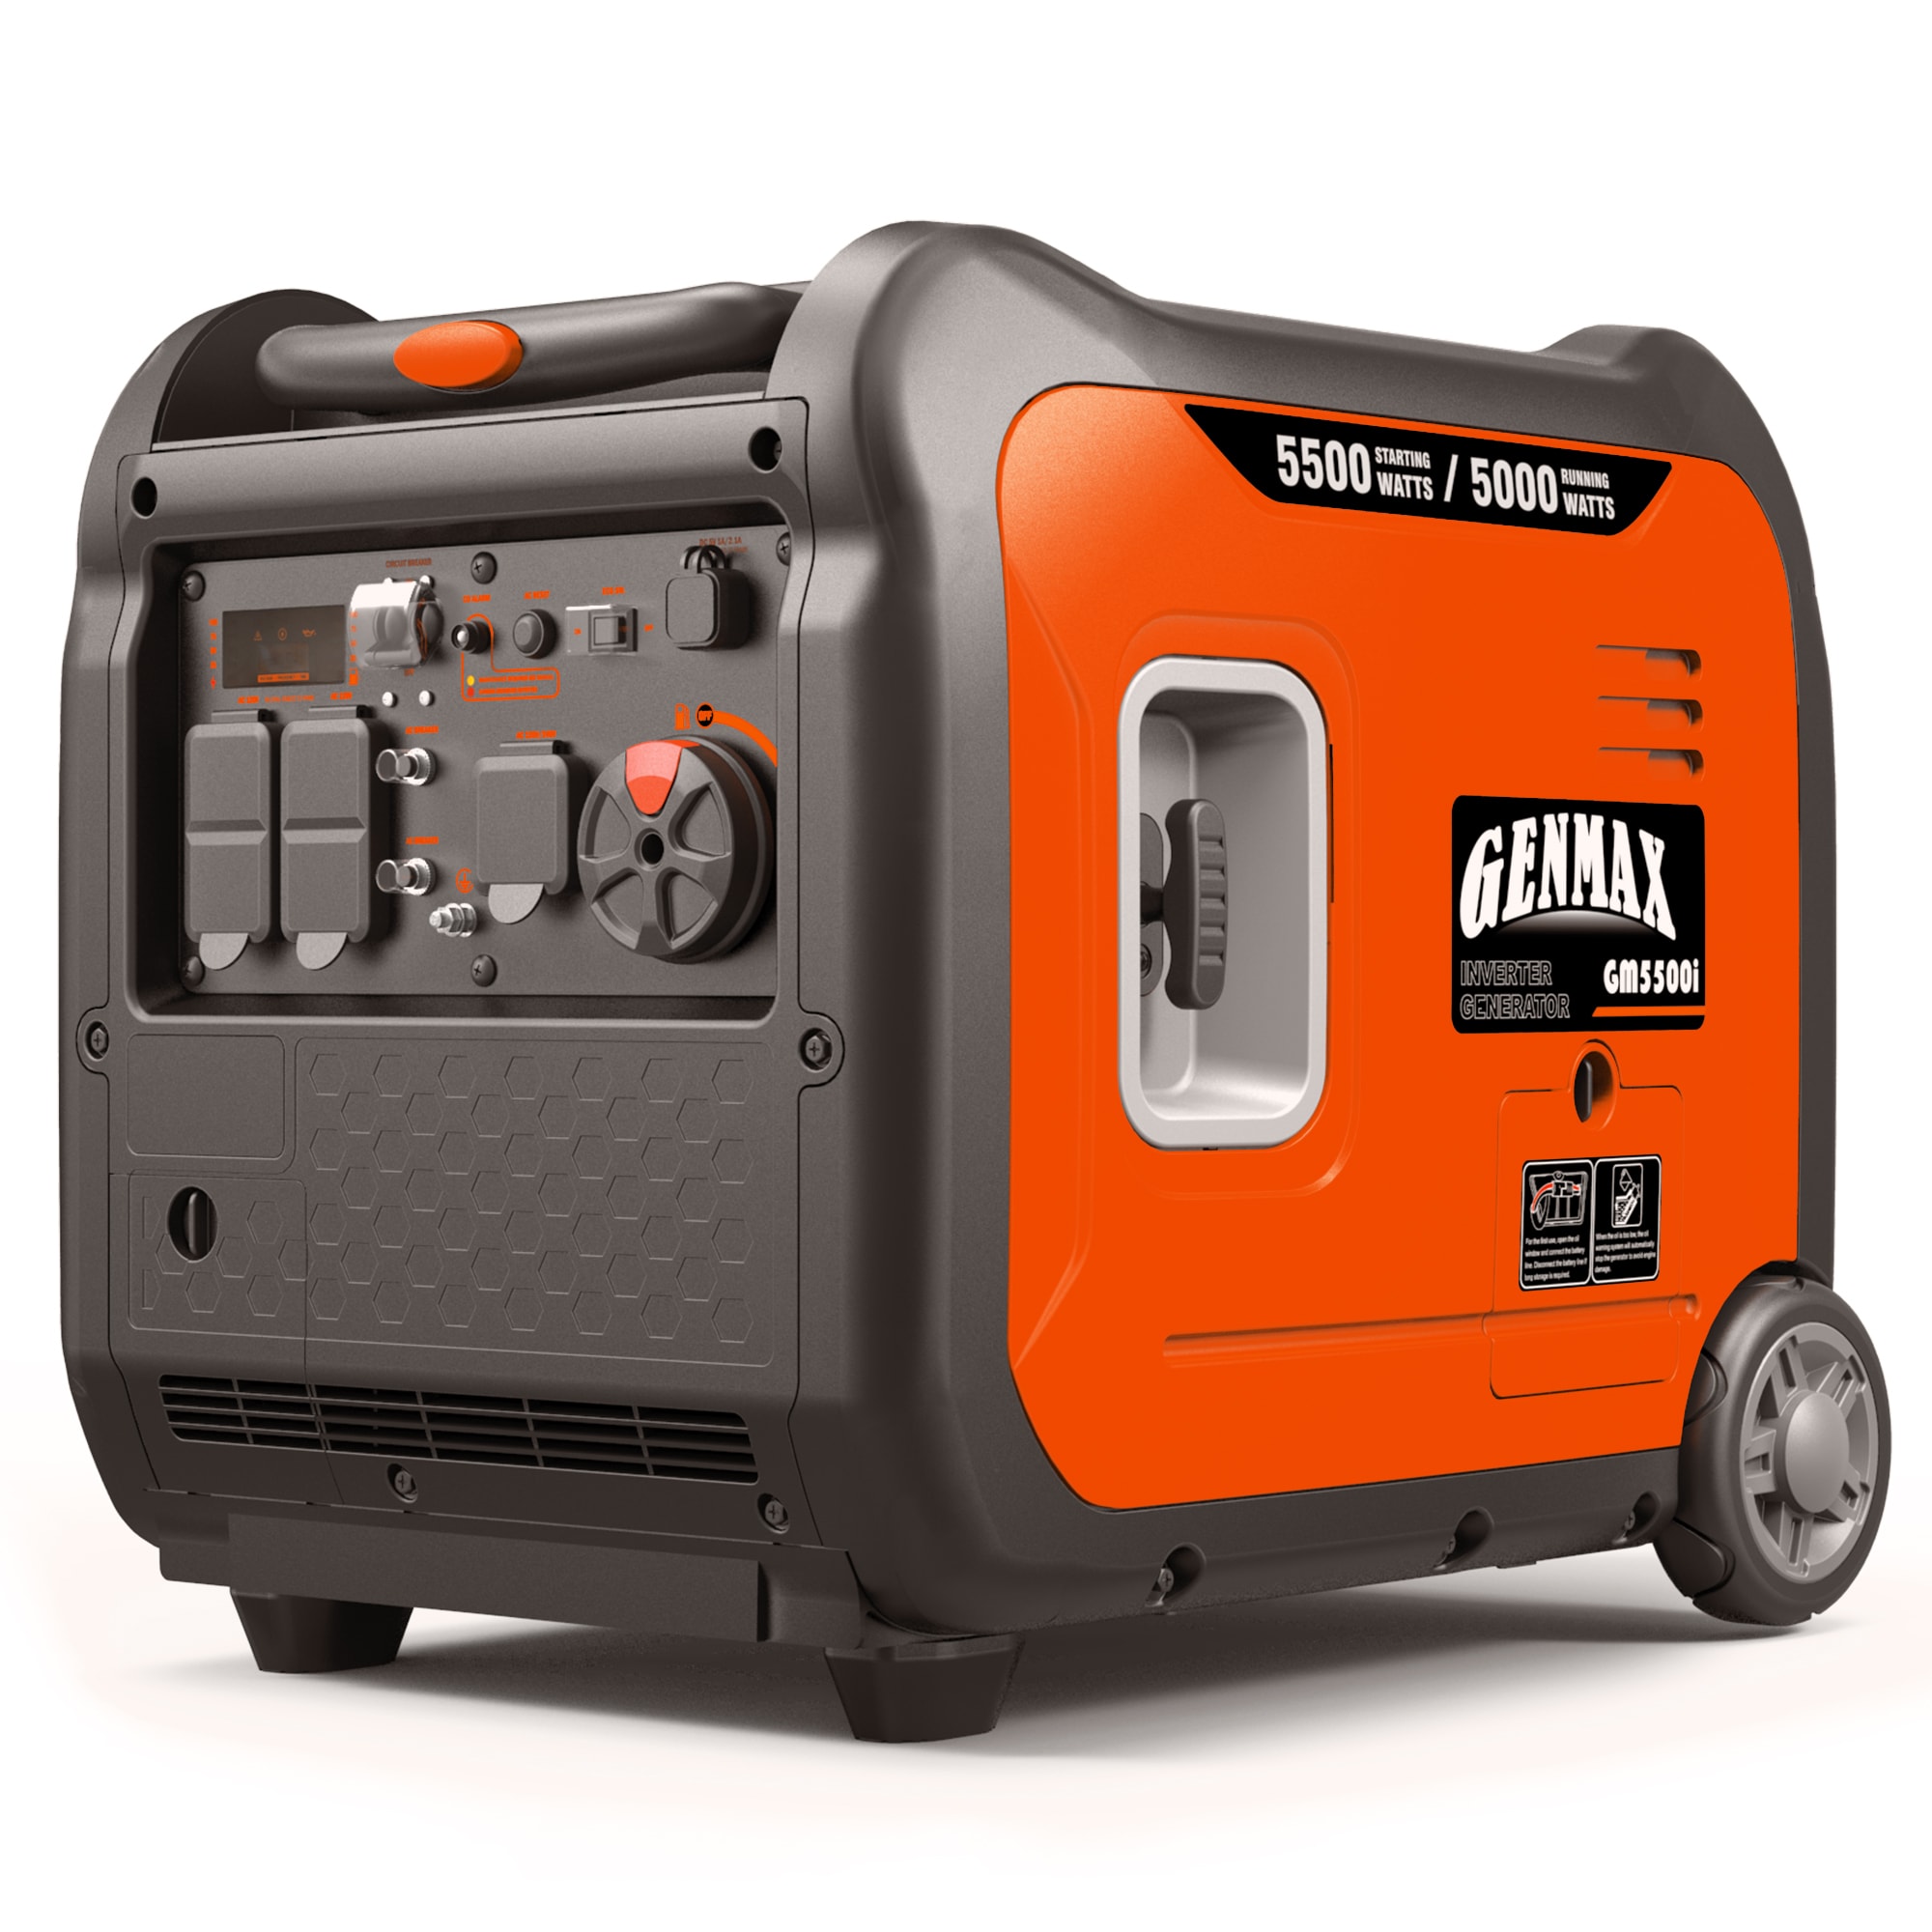 GENMAX Portable Inverter Generator,5500W Ultra-Quiet Gas Engine, EPA Compliant, Eco-Mode Feature, Ultra Lightweight for